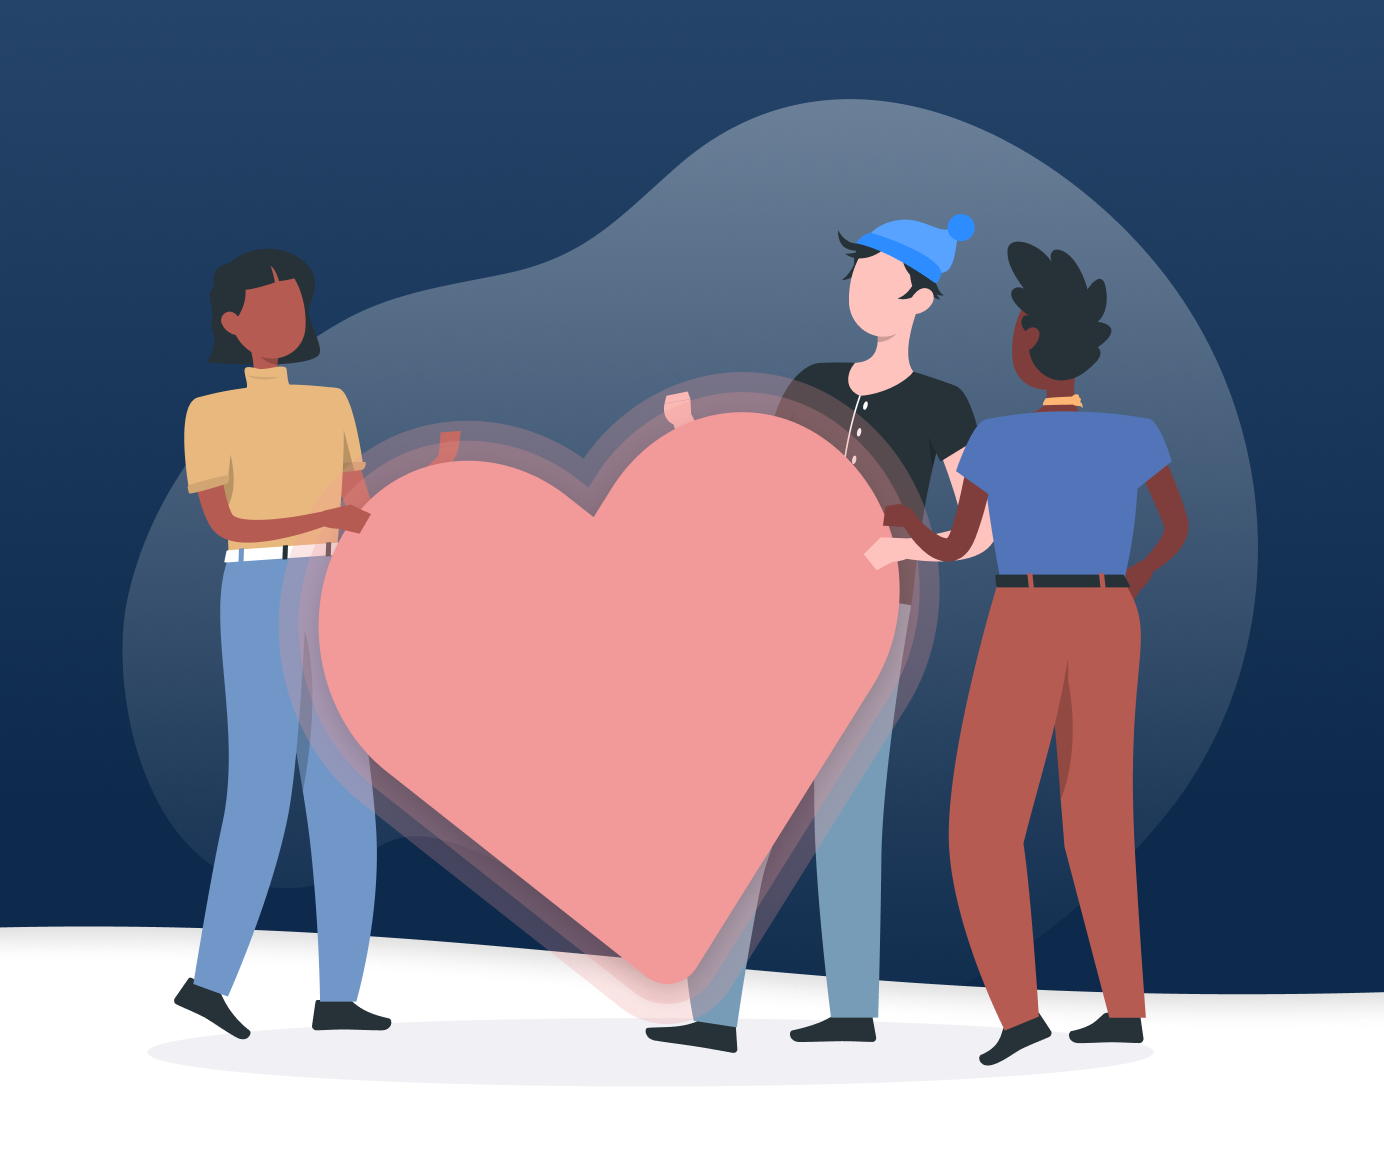 Illustration of three figures holding a heart